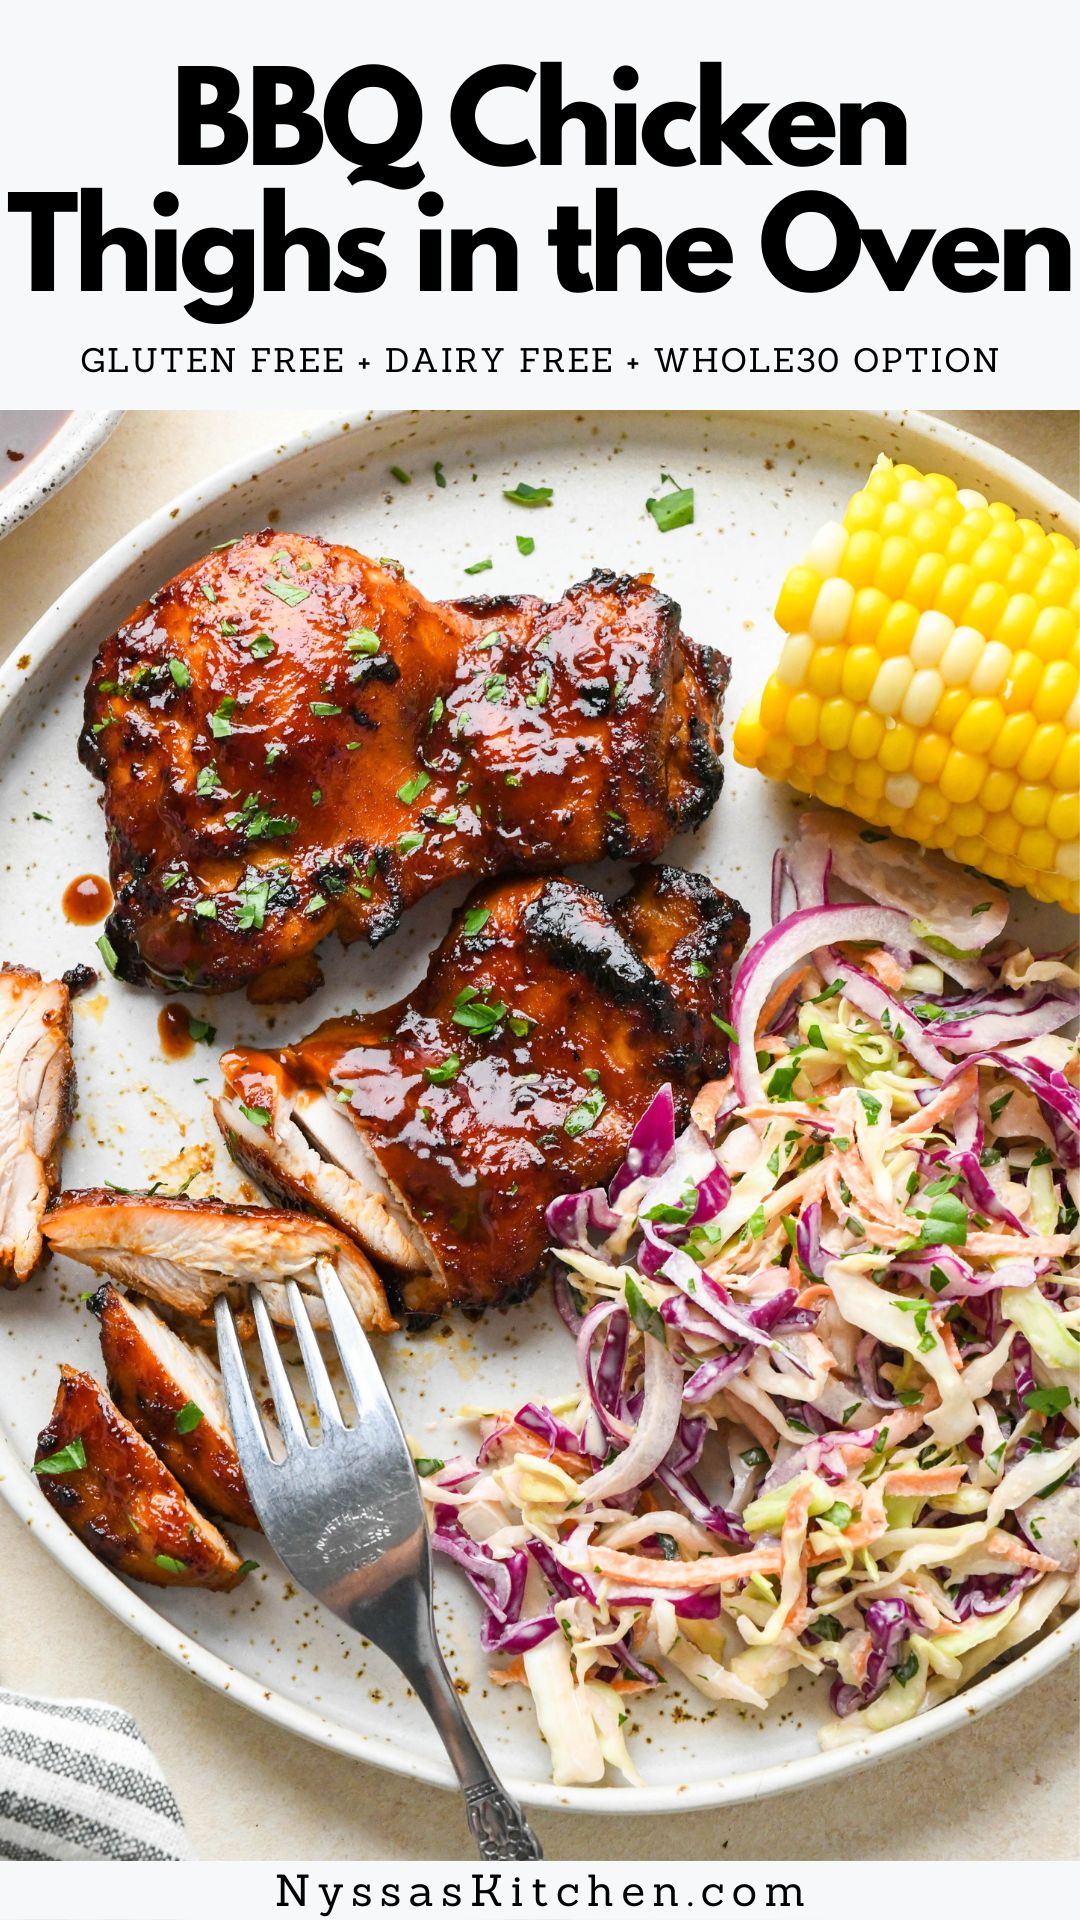 Delicious barbecue chicken is possible without a grill with this recipe for BBQ chicken thighs in the oven! Made with a boneless skinless chicken thighs, a simple seasoning blend, and your favorite bbq sauce. Sticky, lightly charred, and super easy to make. Gluten free, dairy free, Whole30 / paleo option.